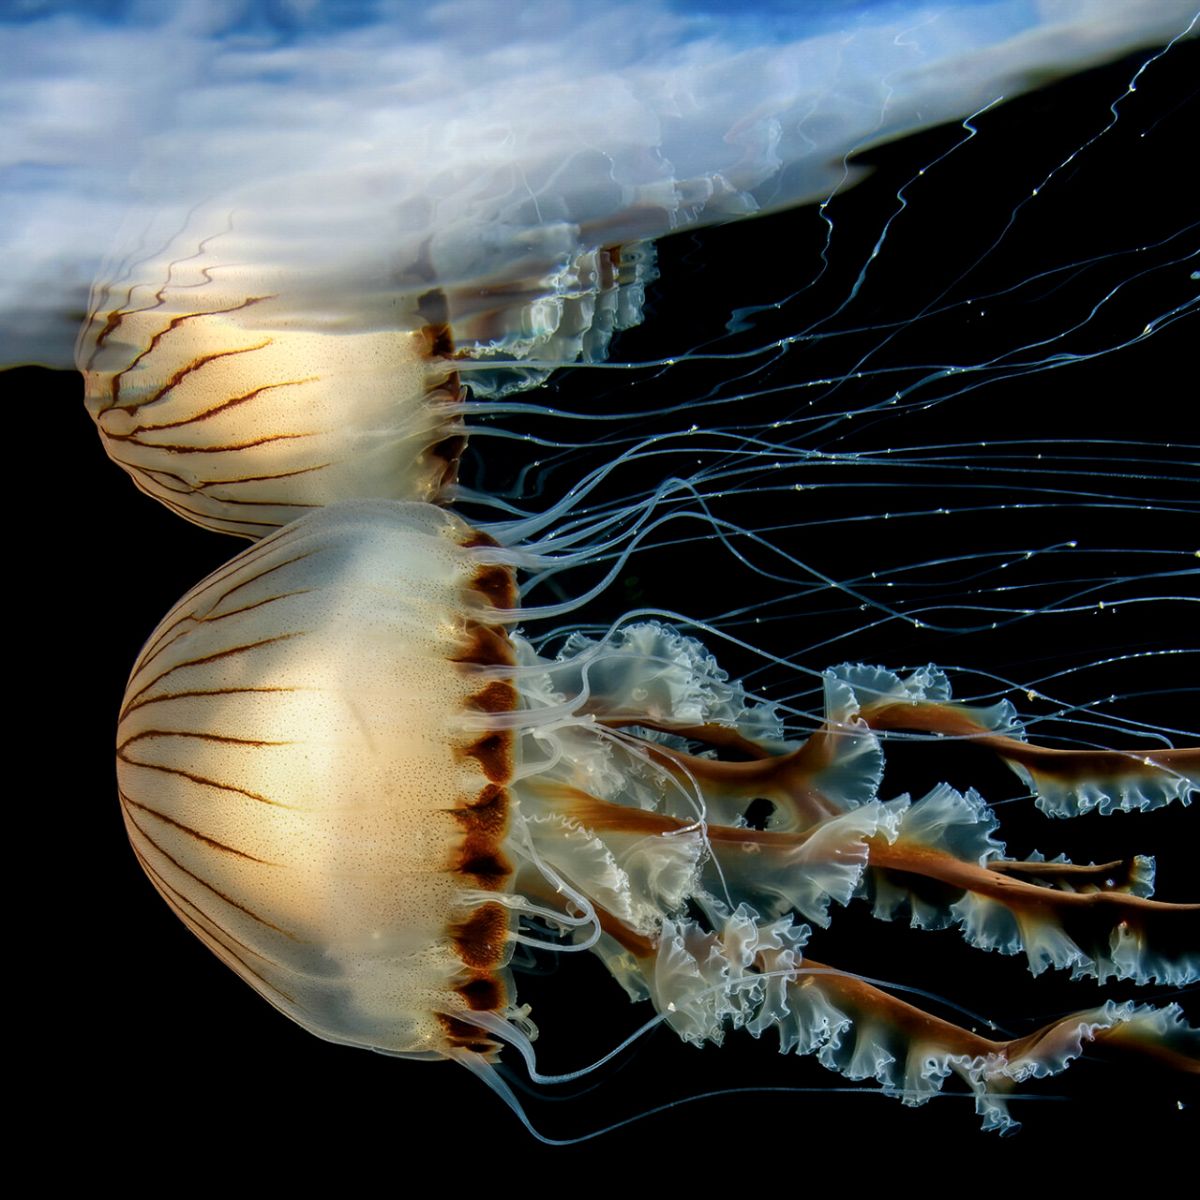 Underwater photographer of the year featured